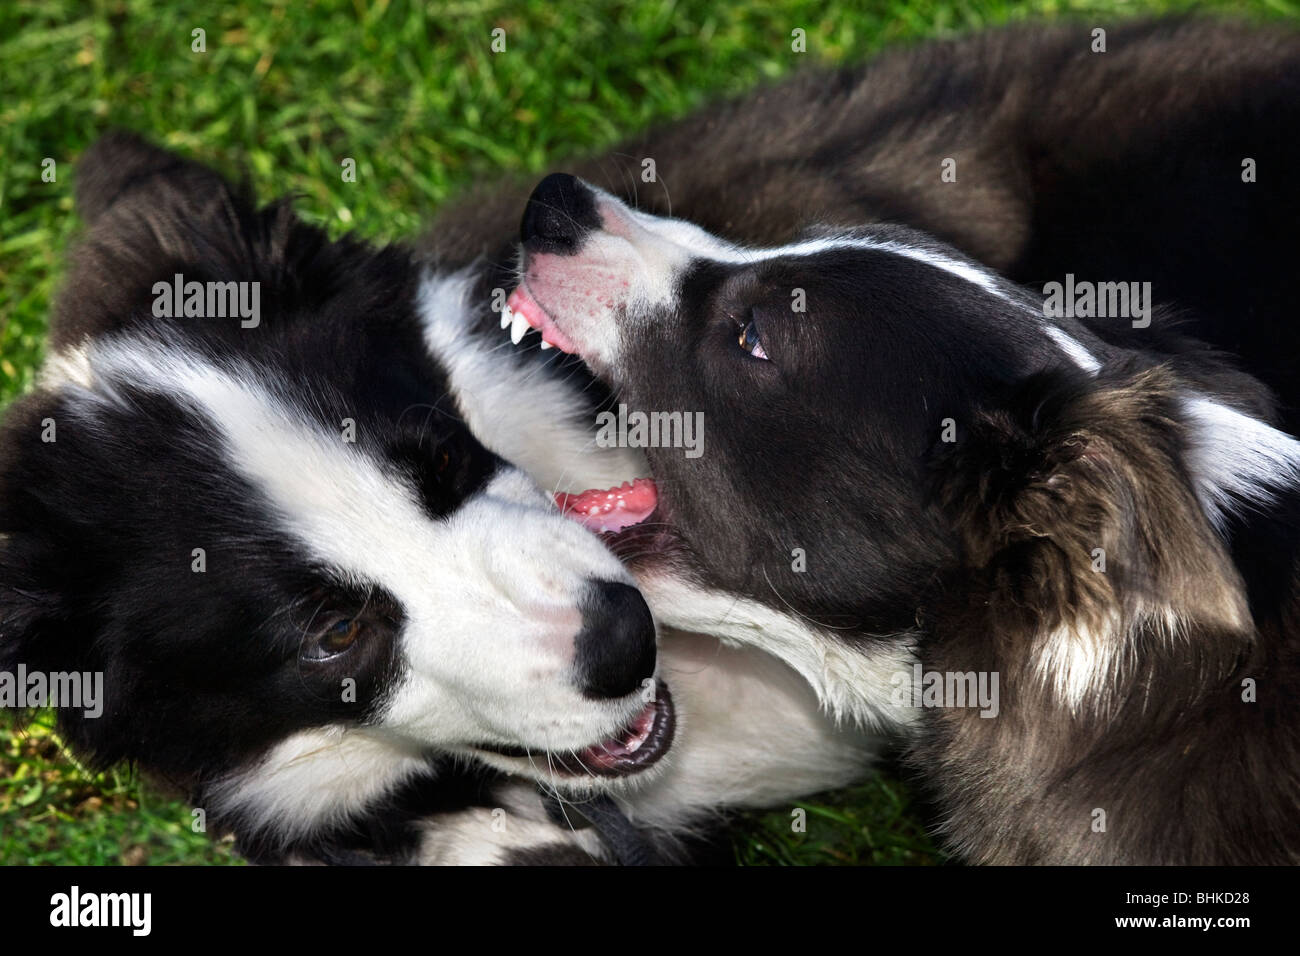 Border Collies (Canis lupus familiaris) play fighting Stock Photo